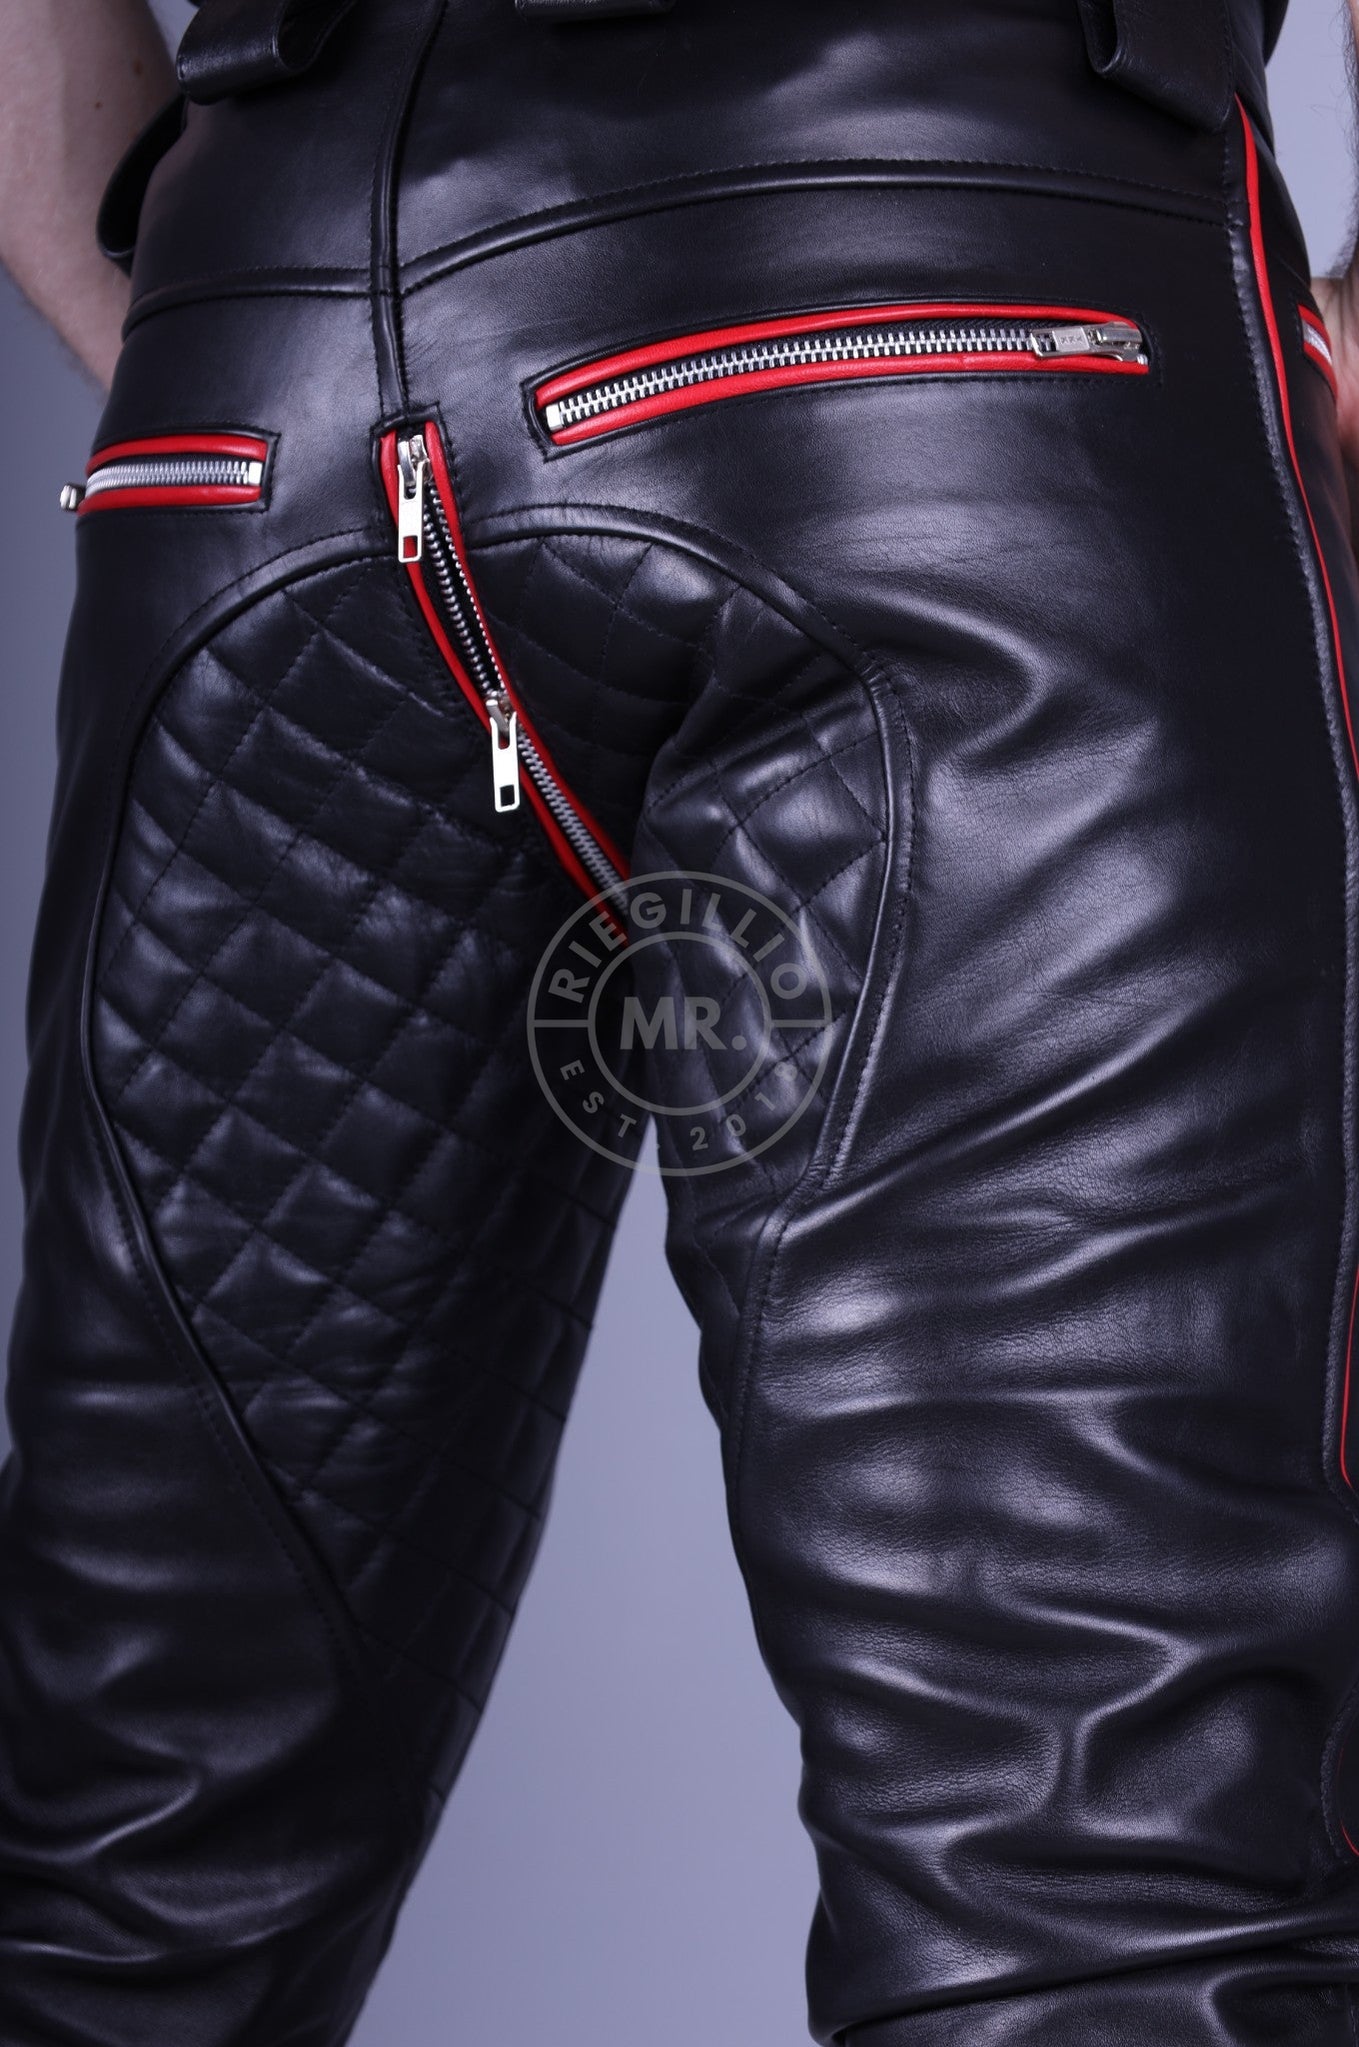 Padded Leather Pants - Red Piping at MR. Riegillio